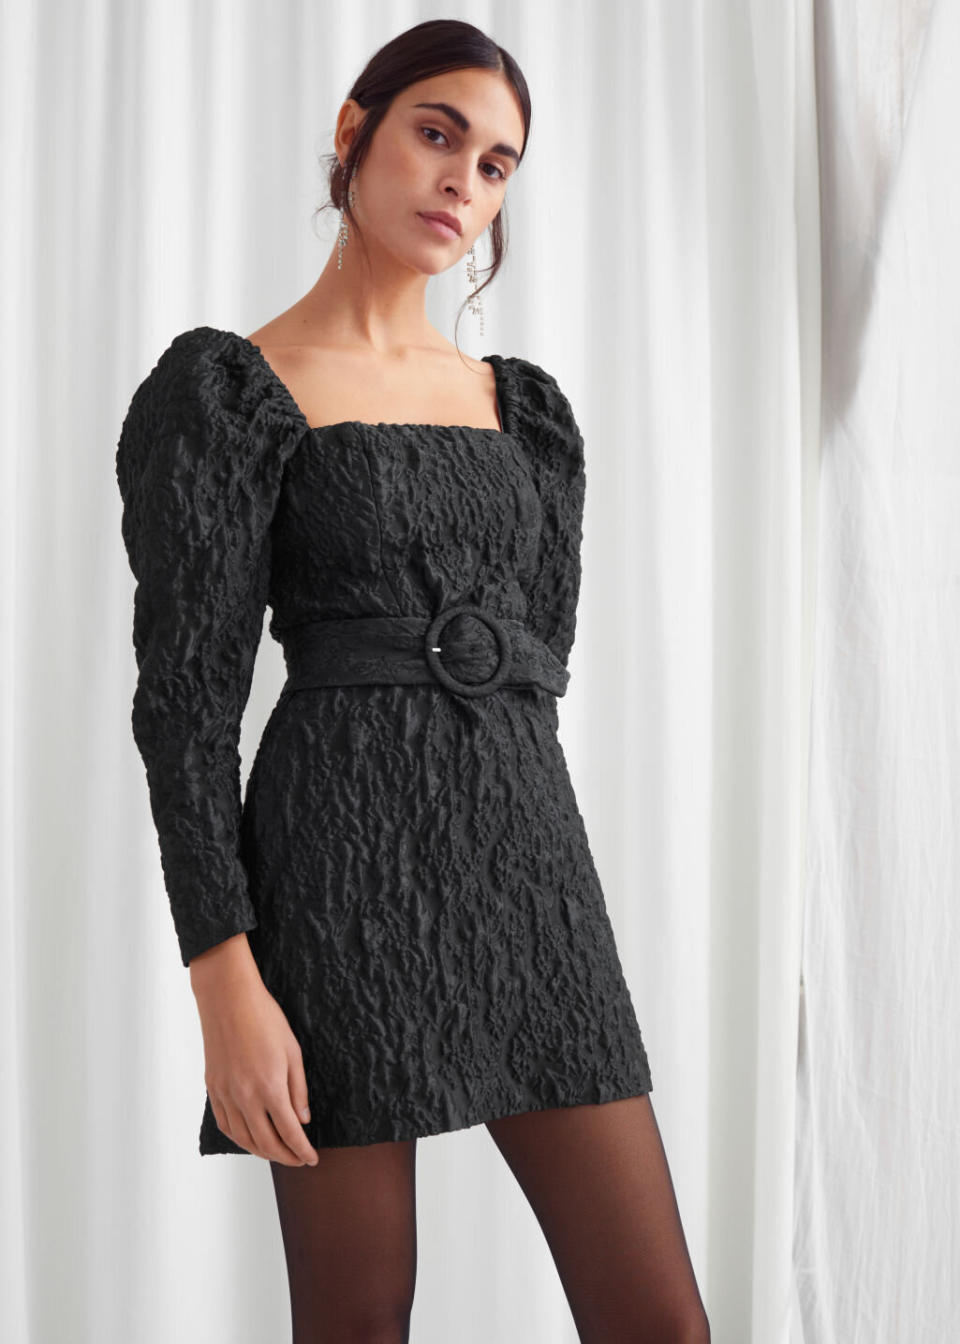 The puffier the sleeves, the better.&nbsp;<a href="https://fave.co/2T41kFg" target="_blank" rel="noopener noreferrer"><strong>Find this dress at &amp; Other Stories</strong></a>. (Photo: & Other Stories)